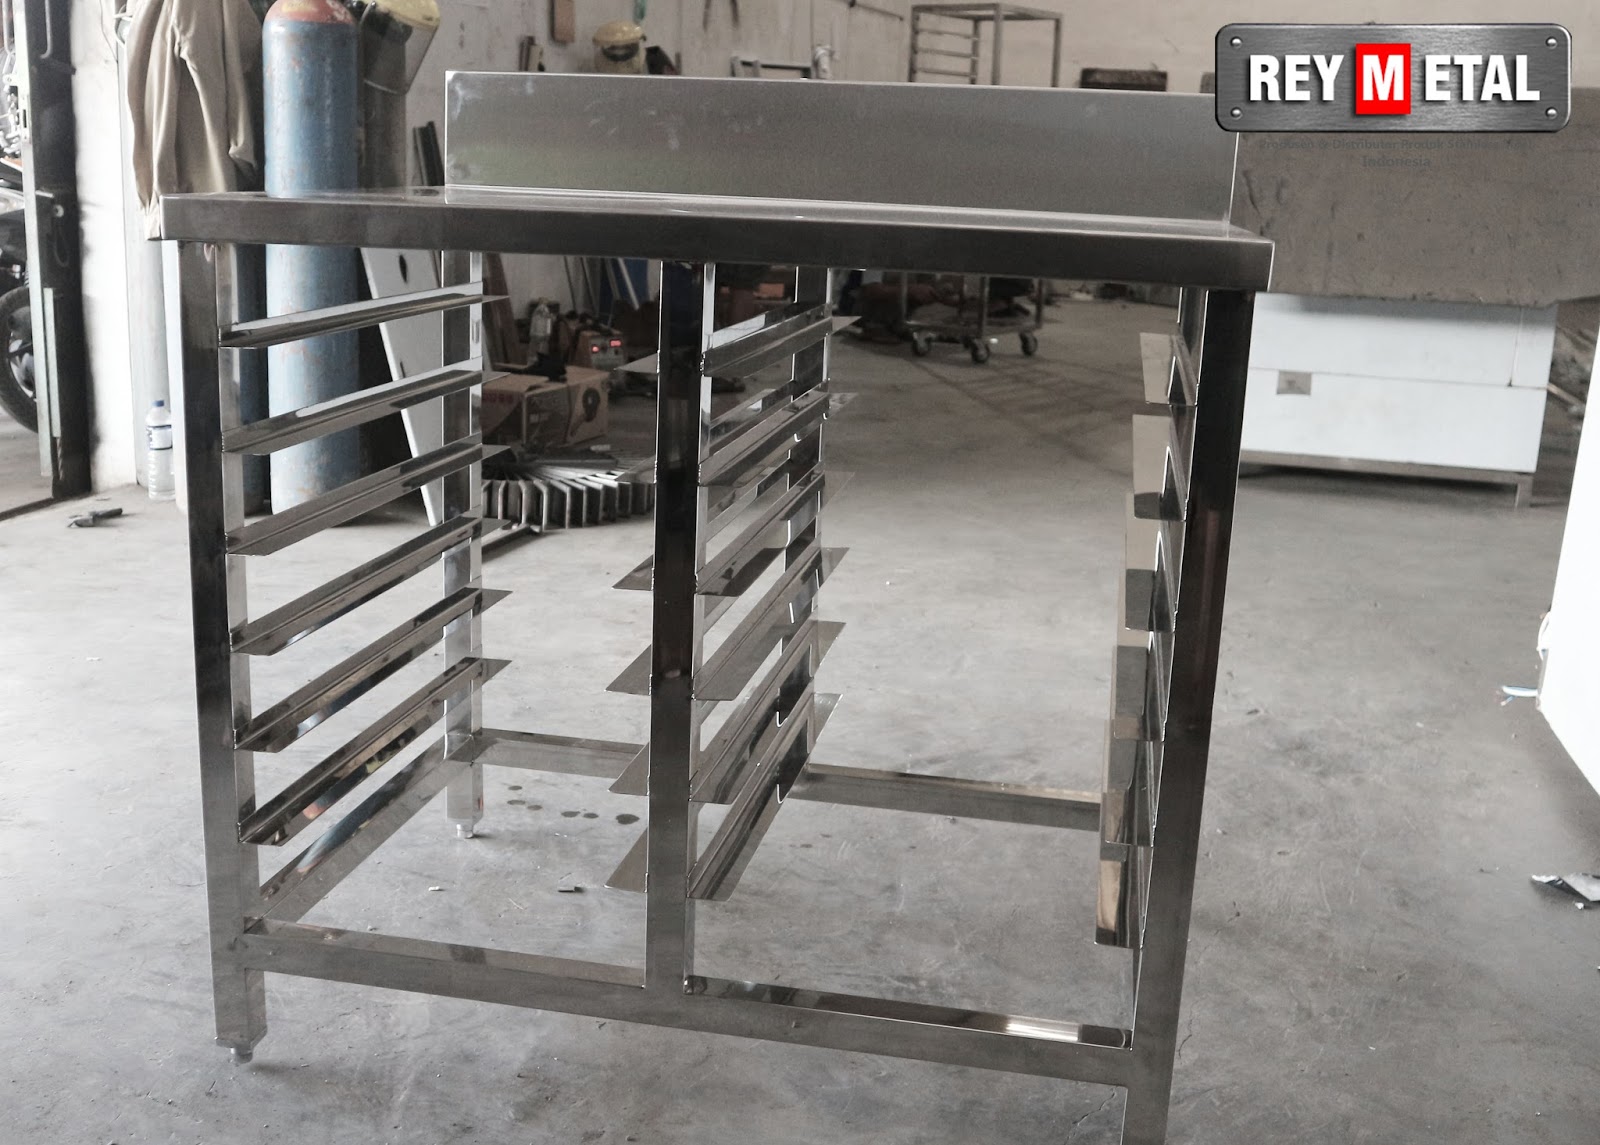 Review Meja  Stainless  Steel  For Bakery REYMETAL COM 